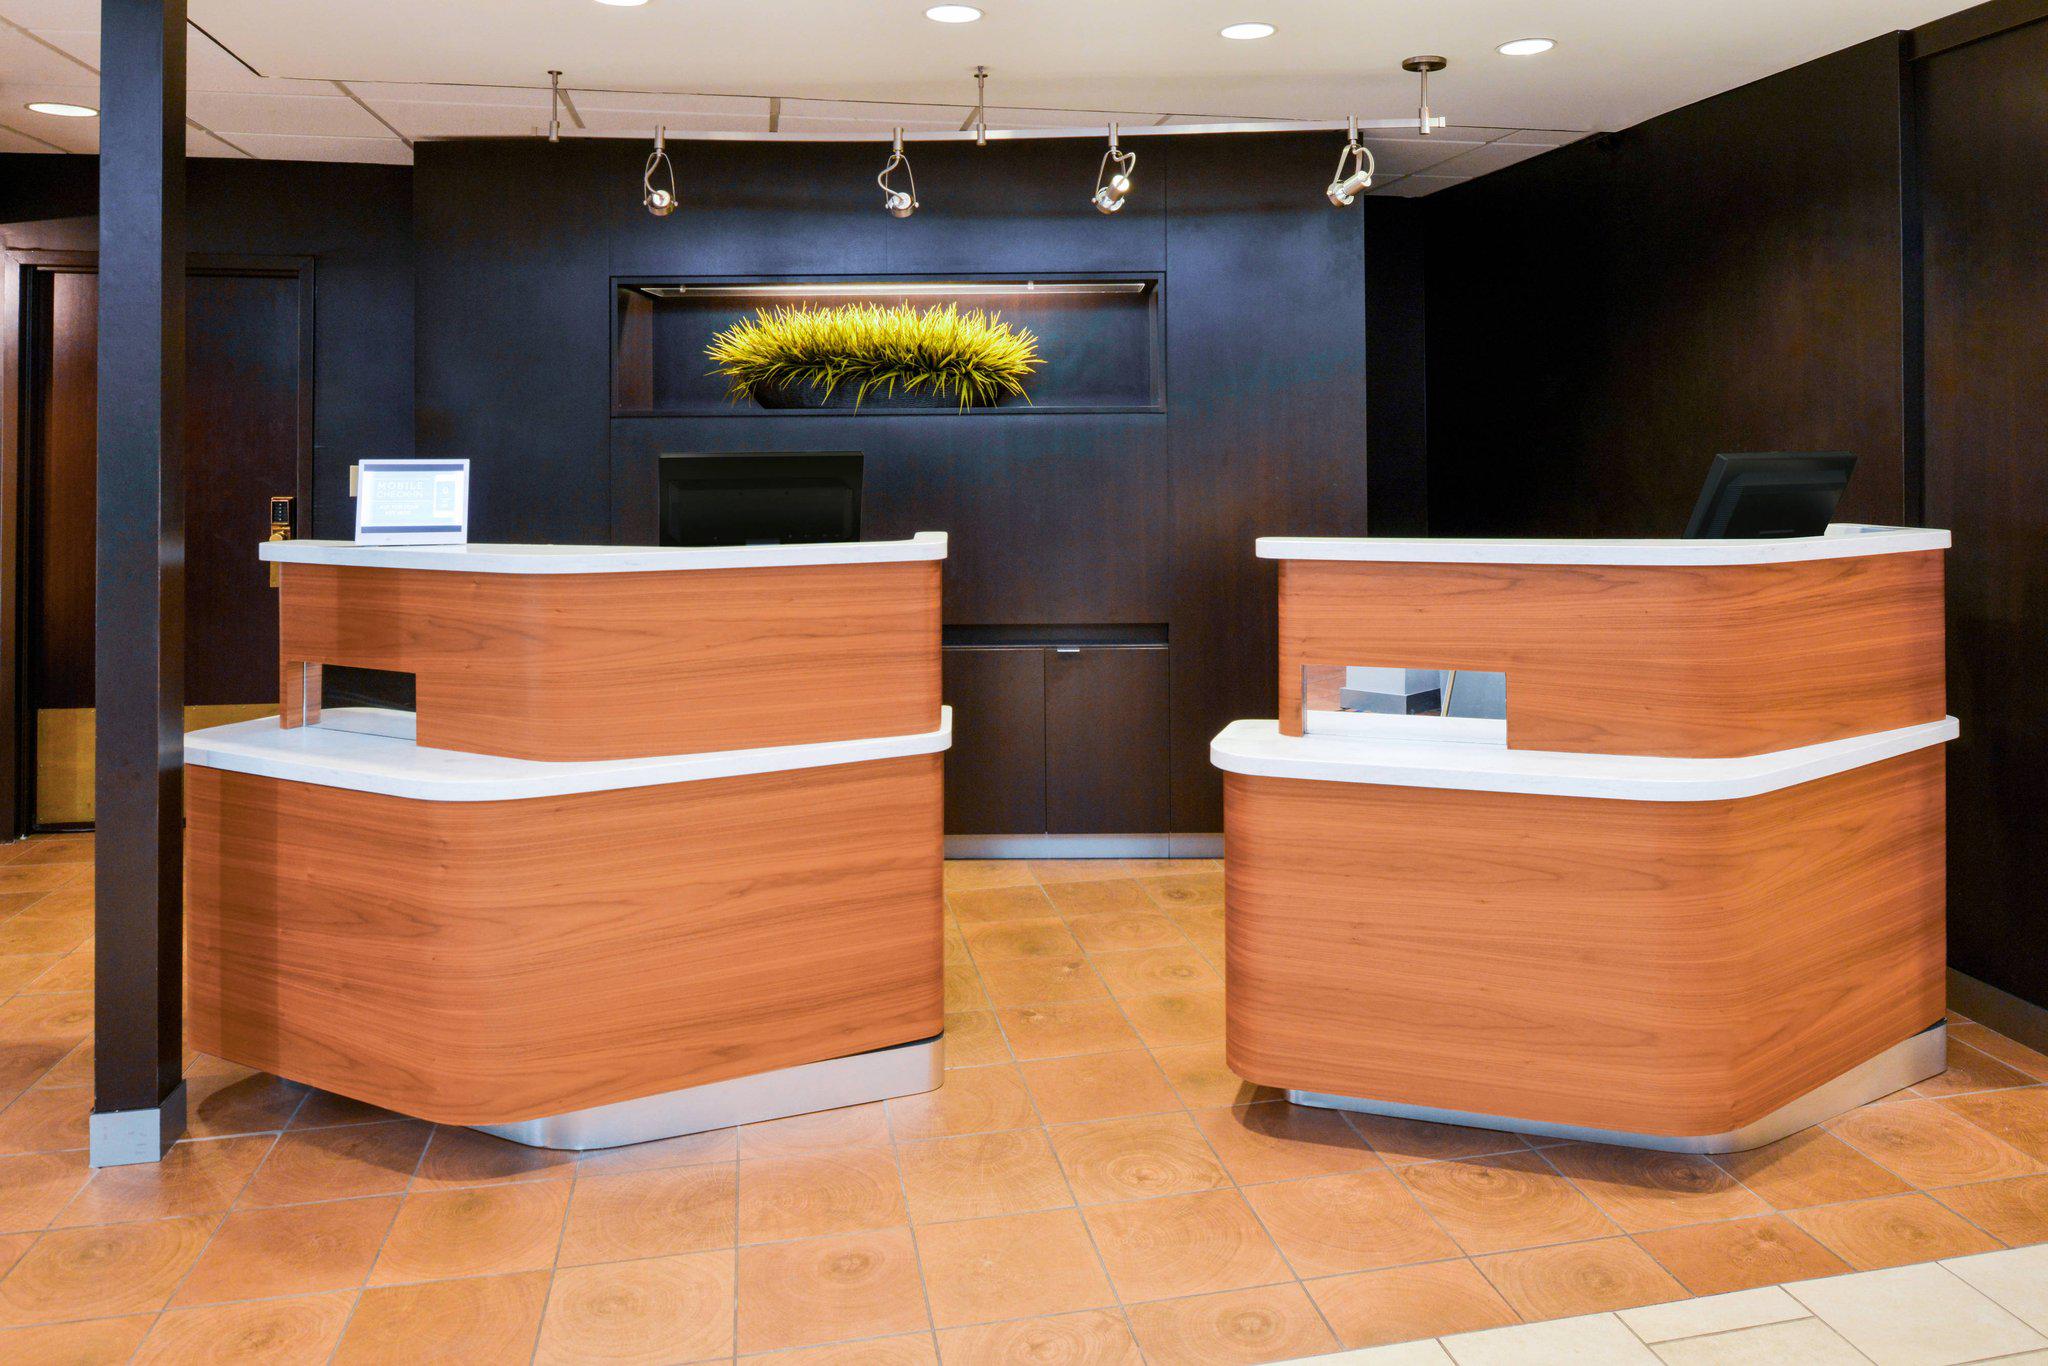 Courtyard by Marriott Beaumont Photo